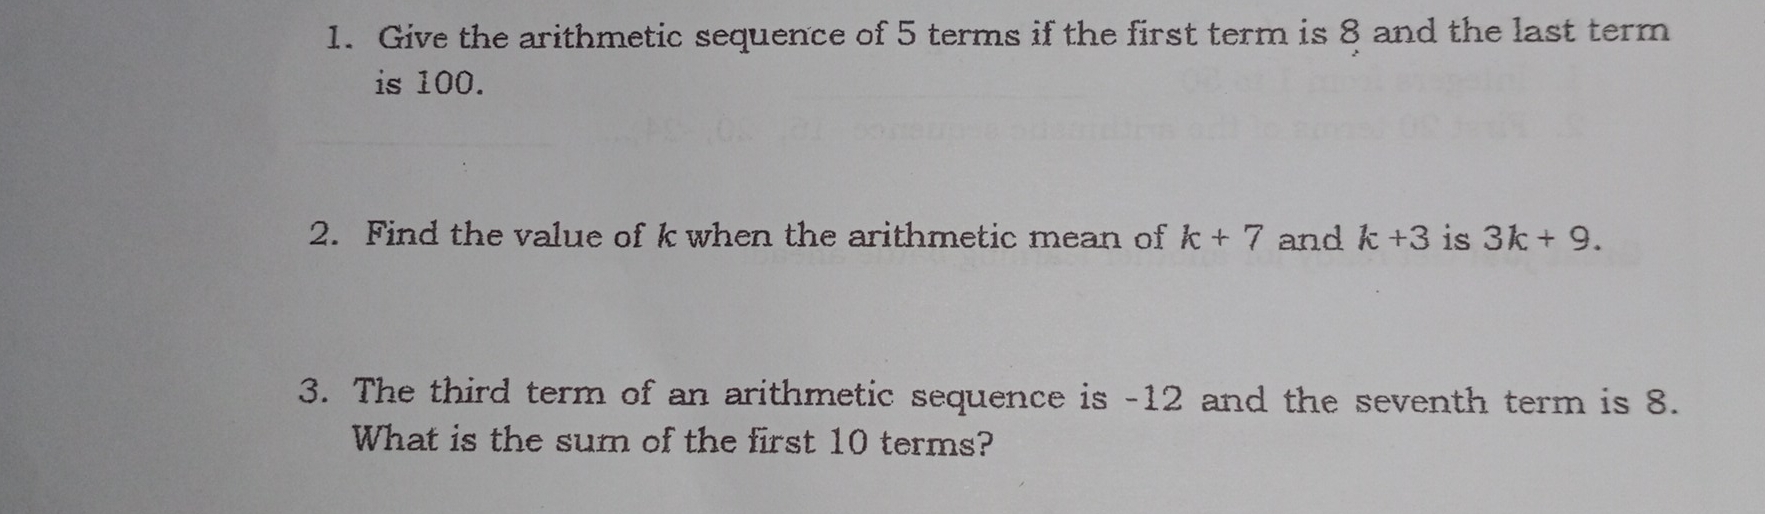 1. Give the arithmetic sequence of 5 terms if the first term is 8 and the last term is 100. 2. Find the value of k when the arithmetic mean of k+7 and k+3 is 3k+9 3. The third term of an arithmetic sequence is -12 and the seventh term is 8. What is the sum of the first 10 terms?